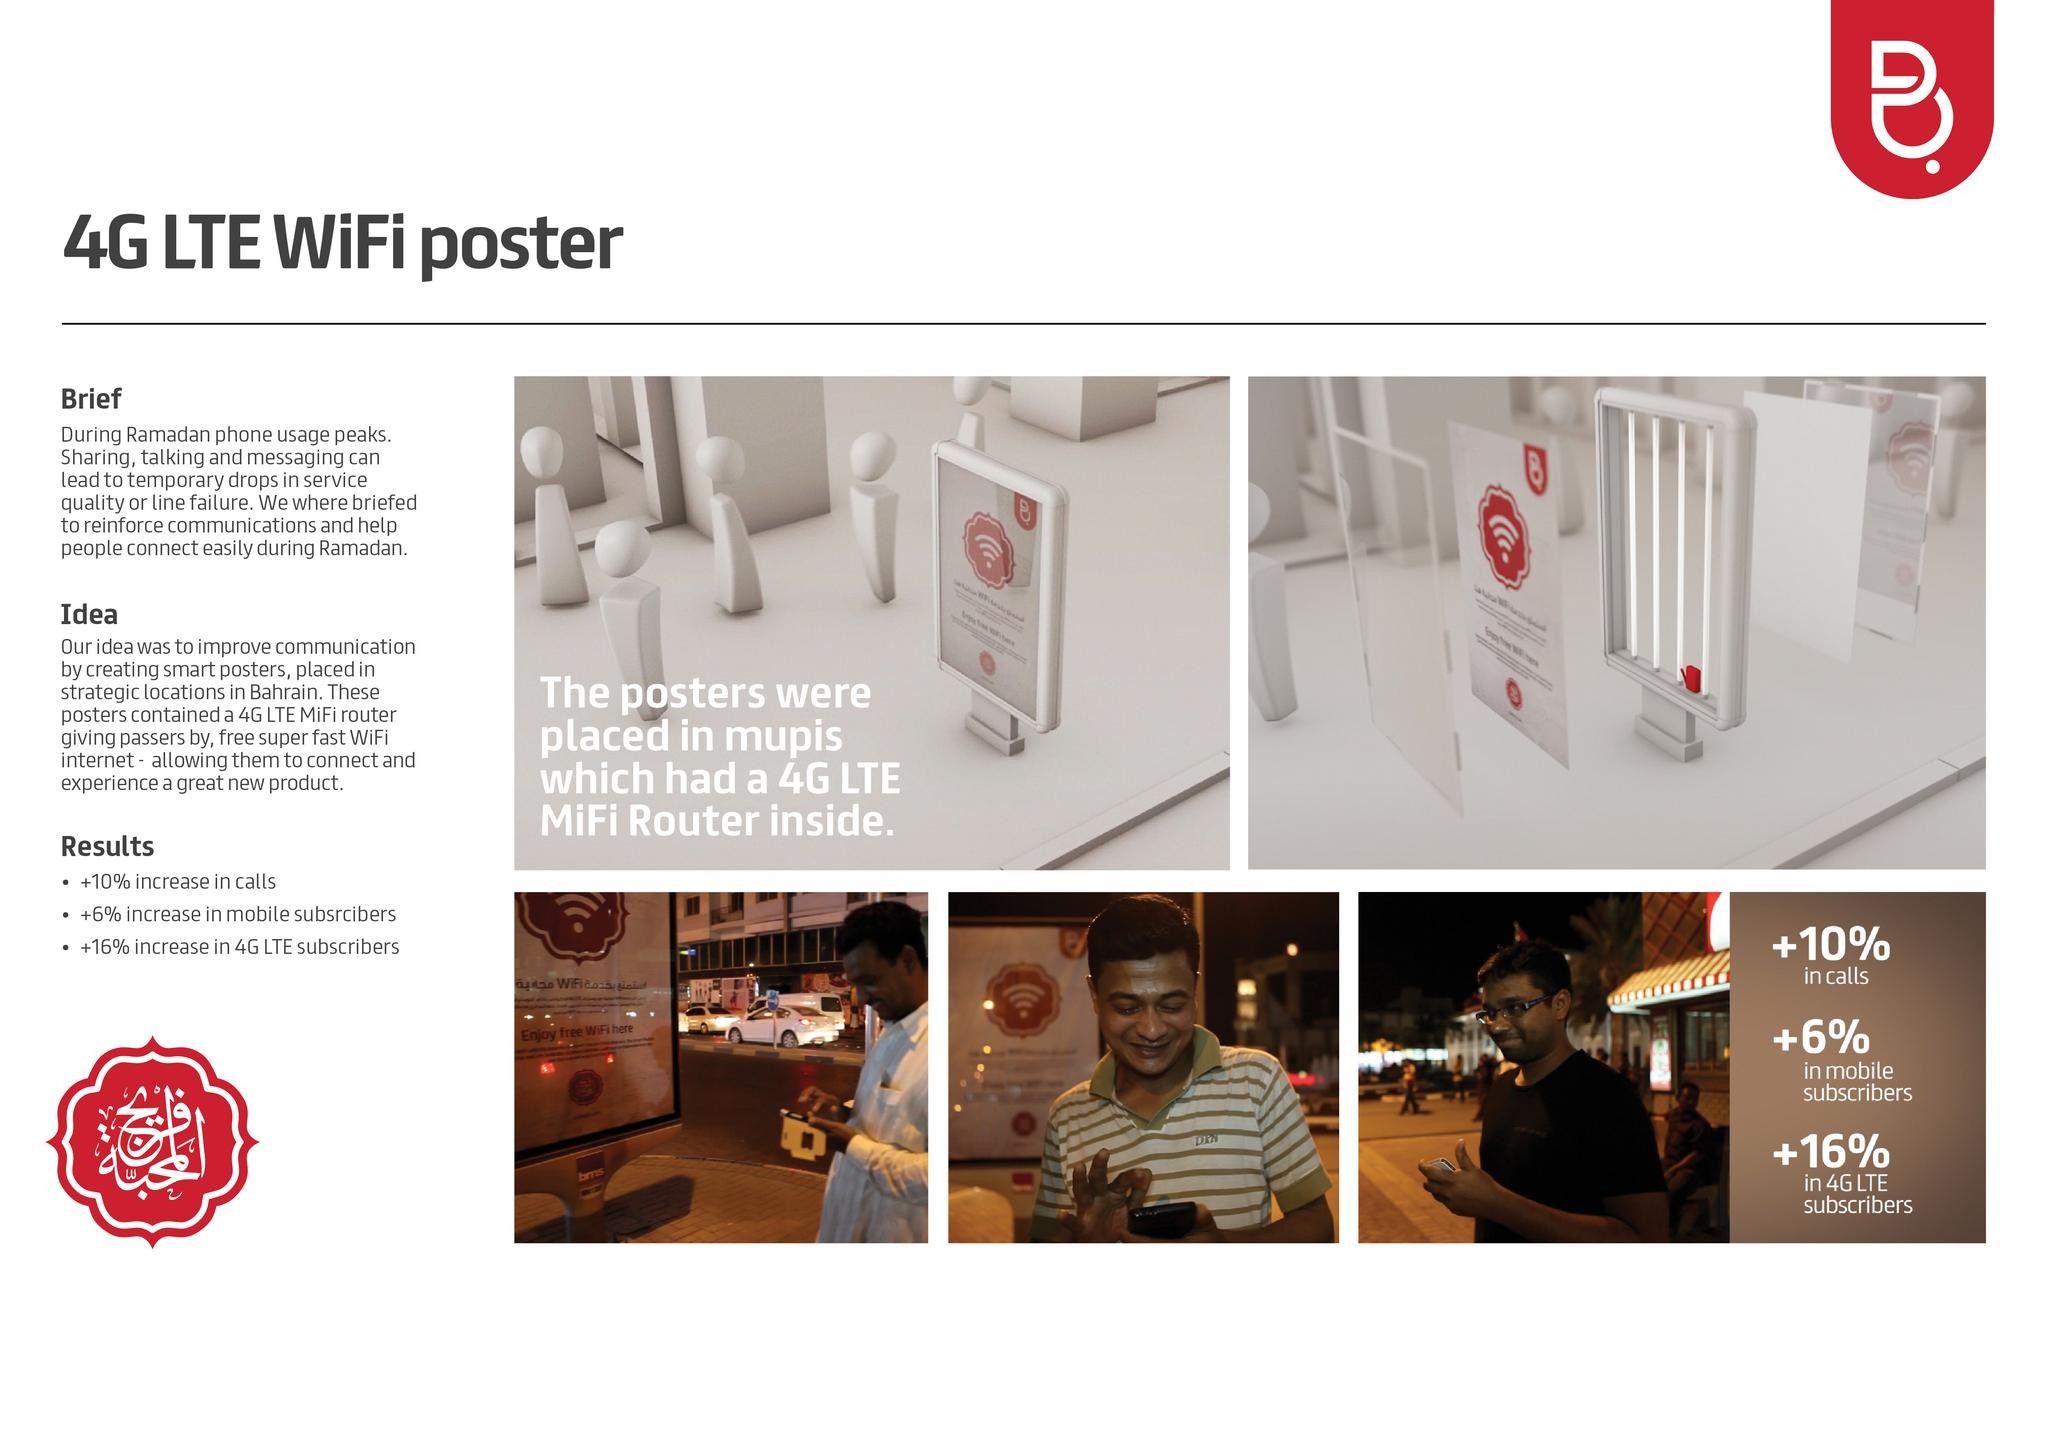 WIFI POSTER